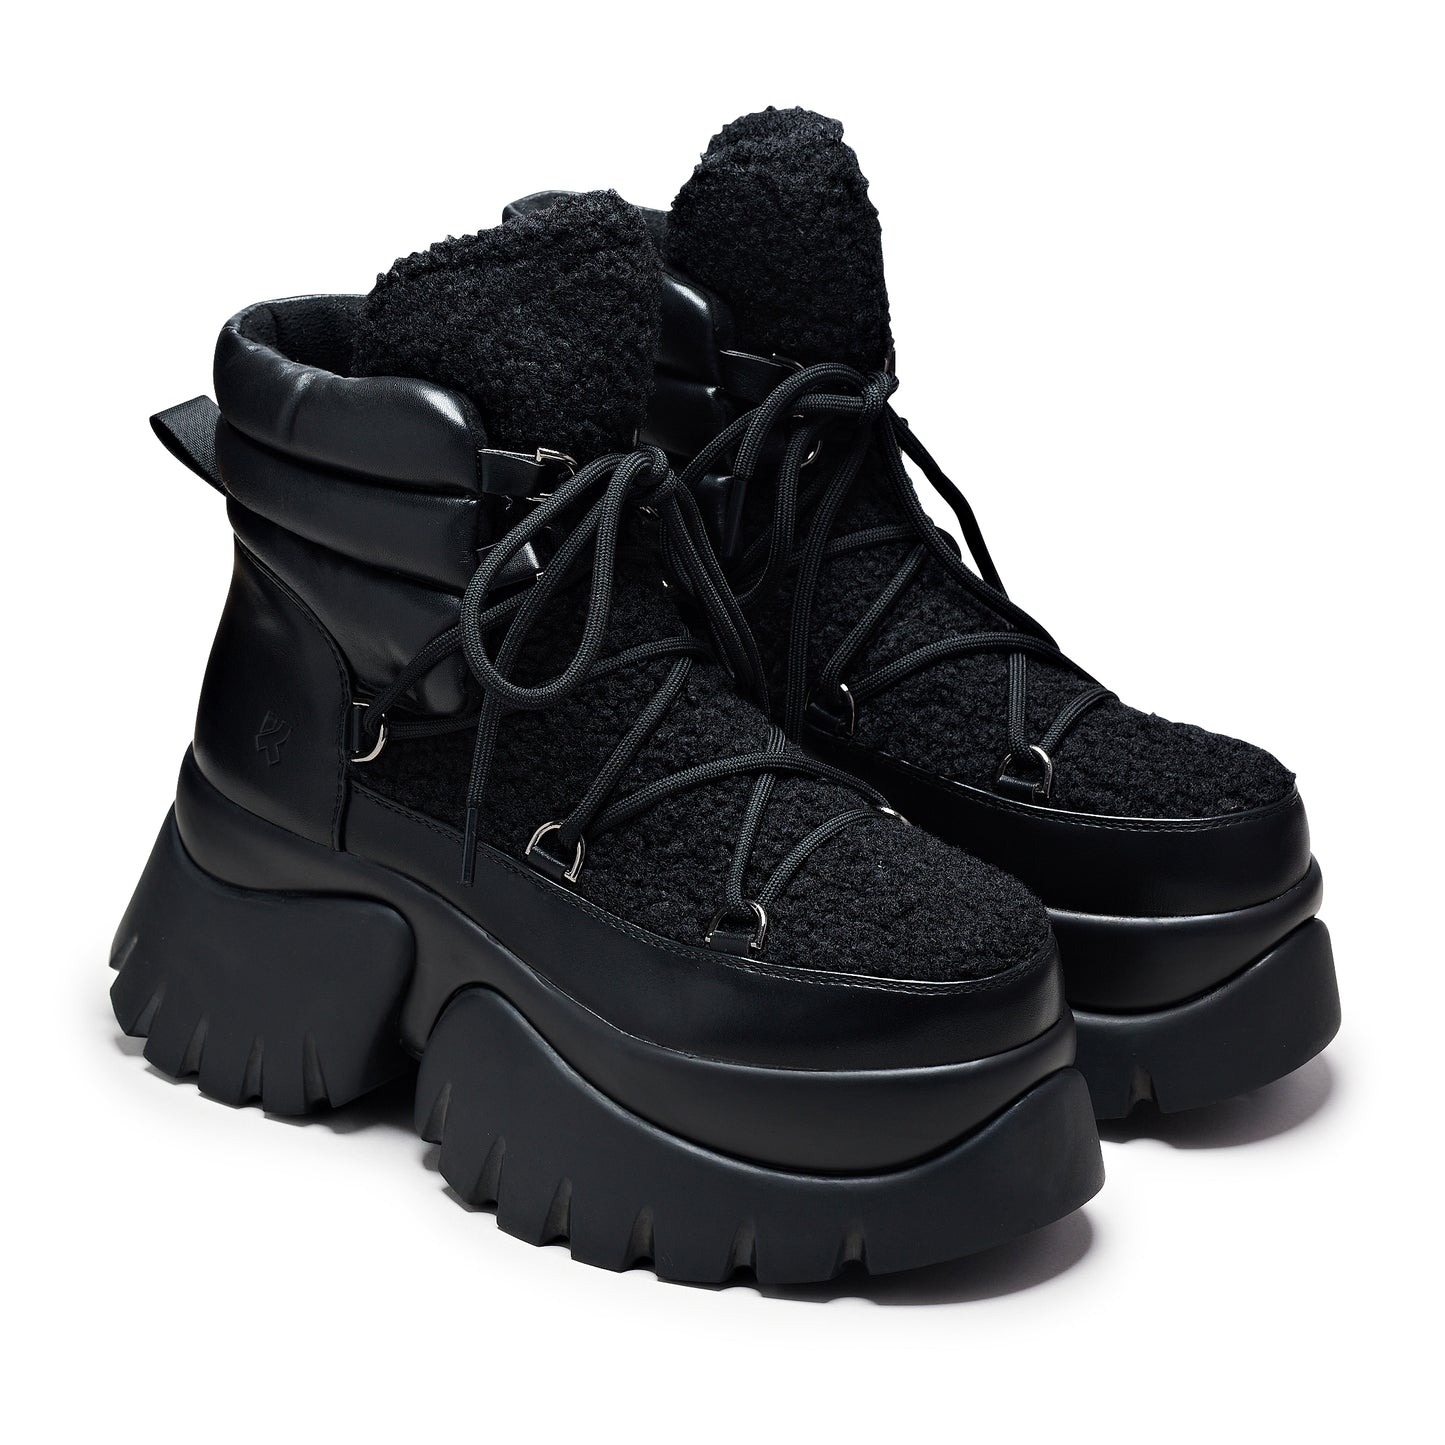 Black Fluffy Vilun Winter Boots - Ankle Boots - KOI Footwear - Black - Three-Quarter View